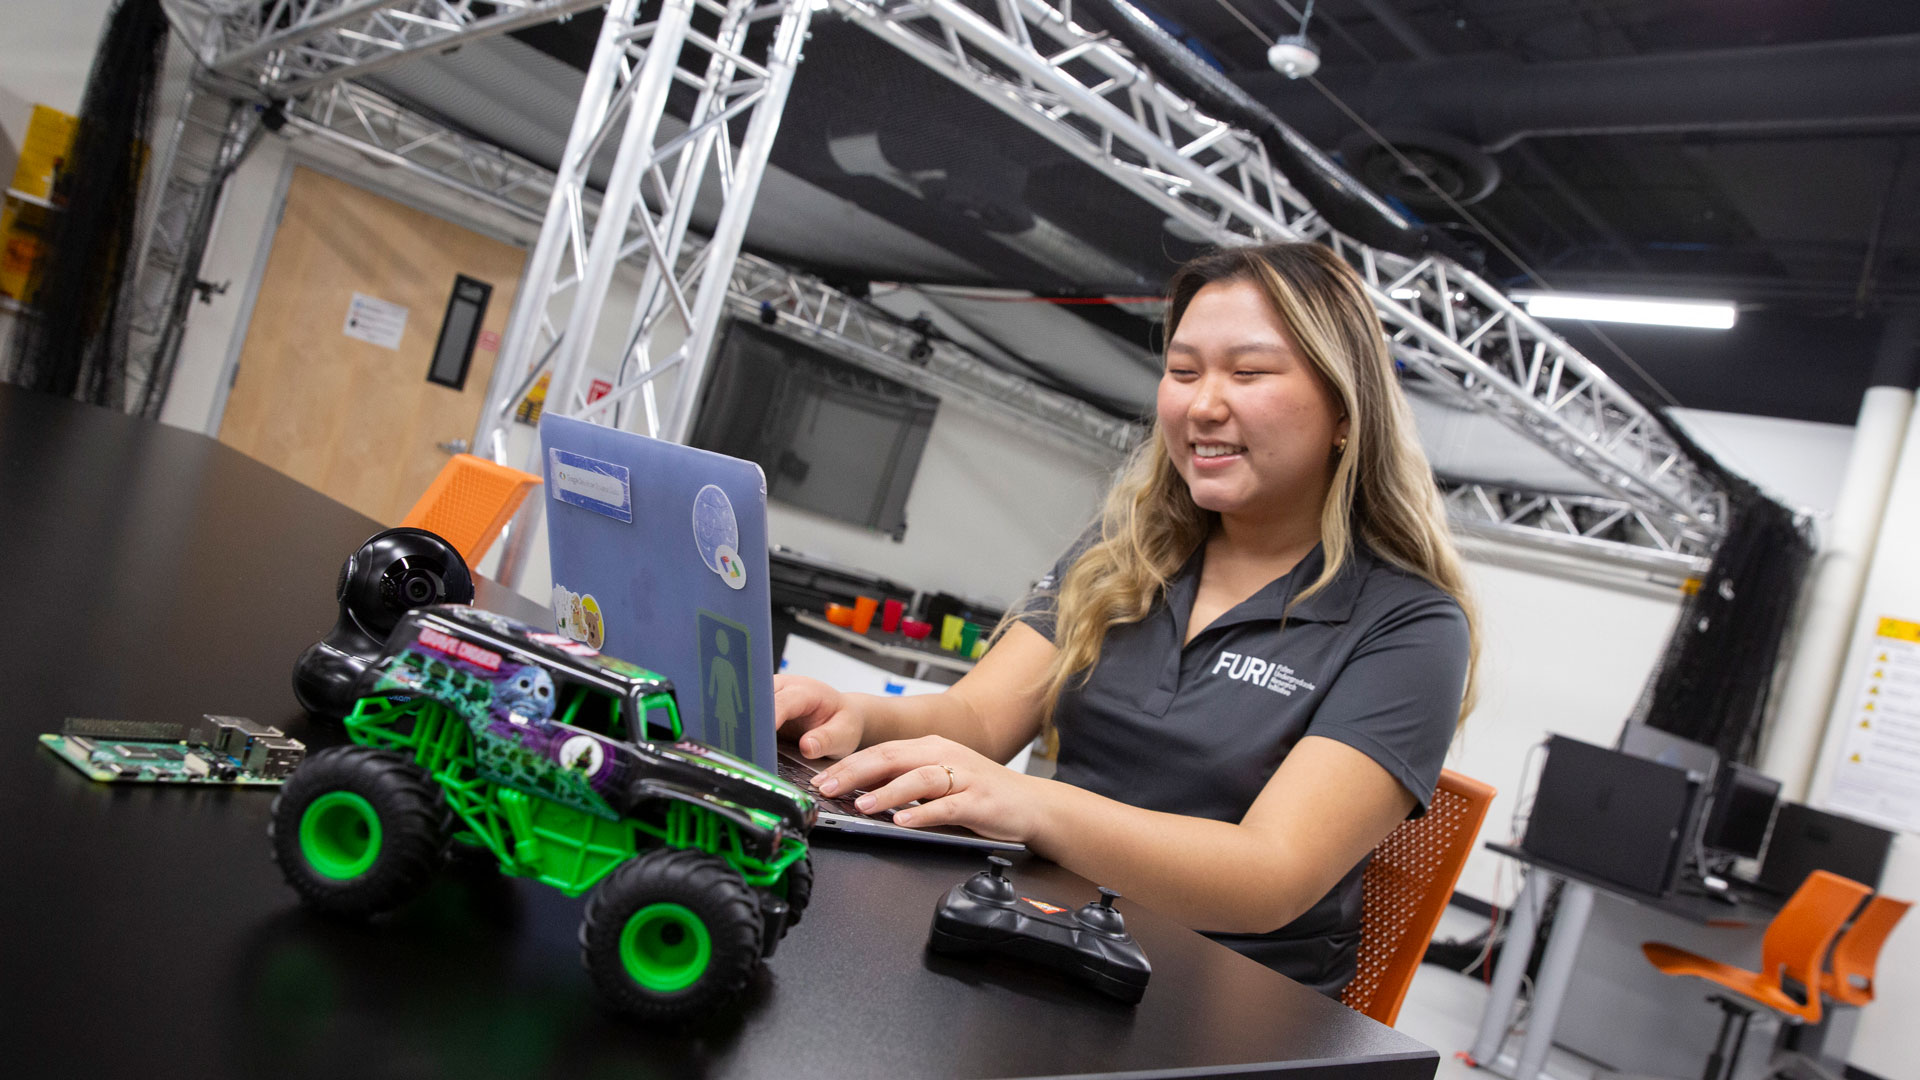 FURI student Jenna Jae Eun Lee works on a laptop with a remote control car in a project to use computer science to stop impaired driving.